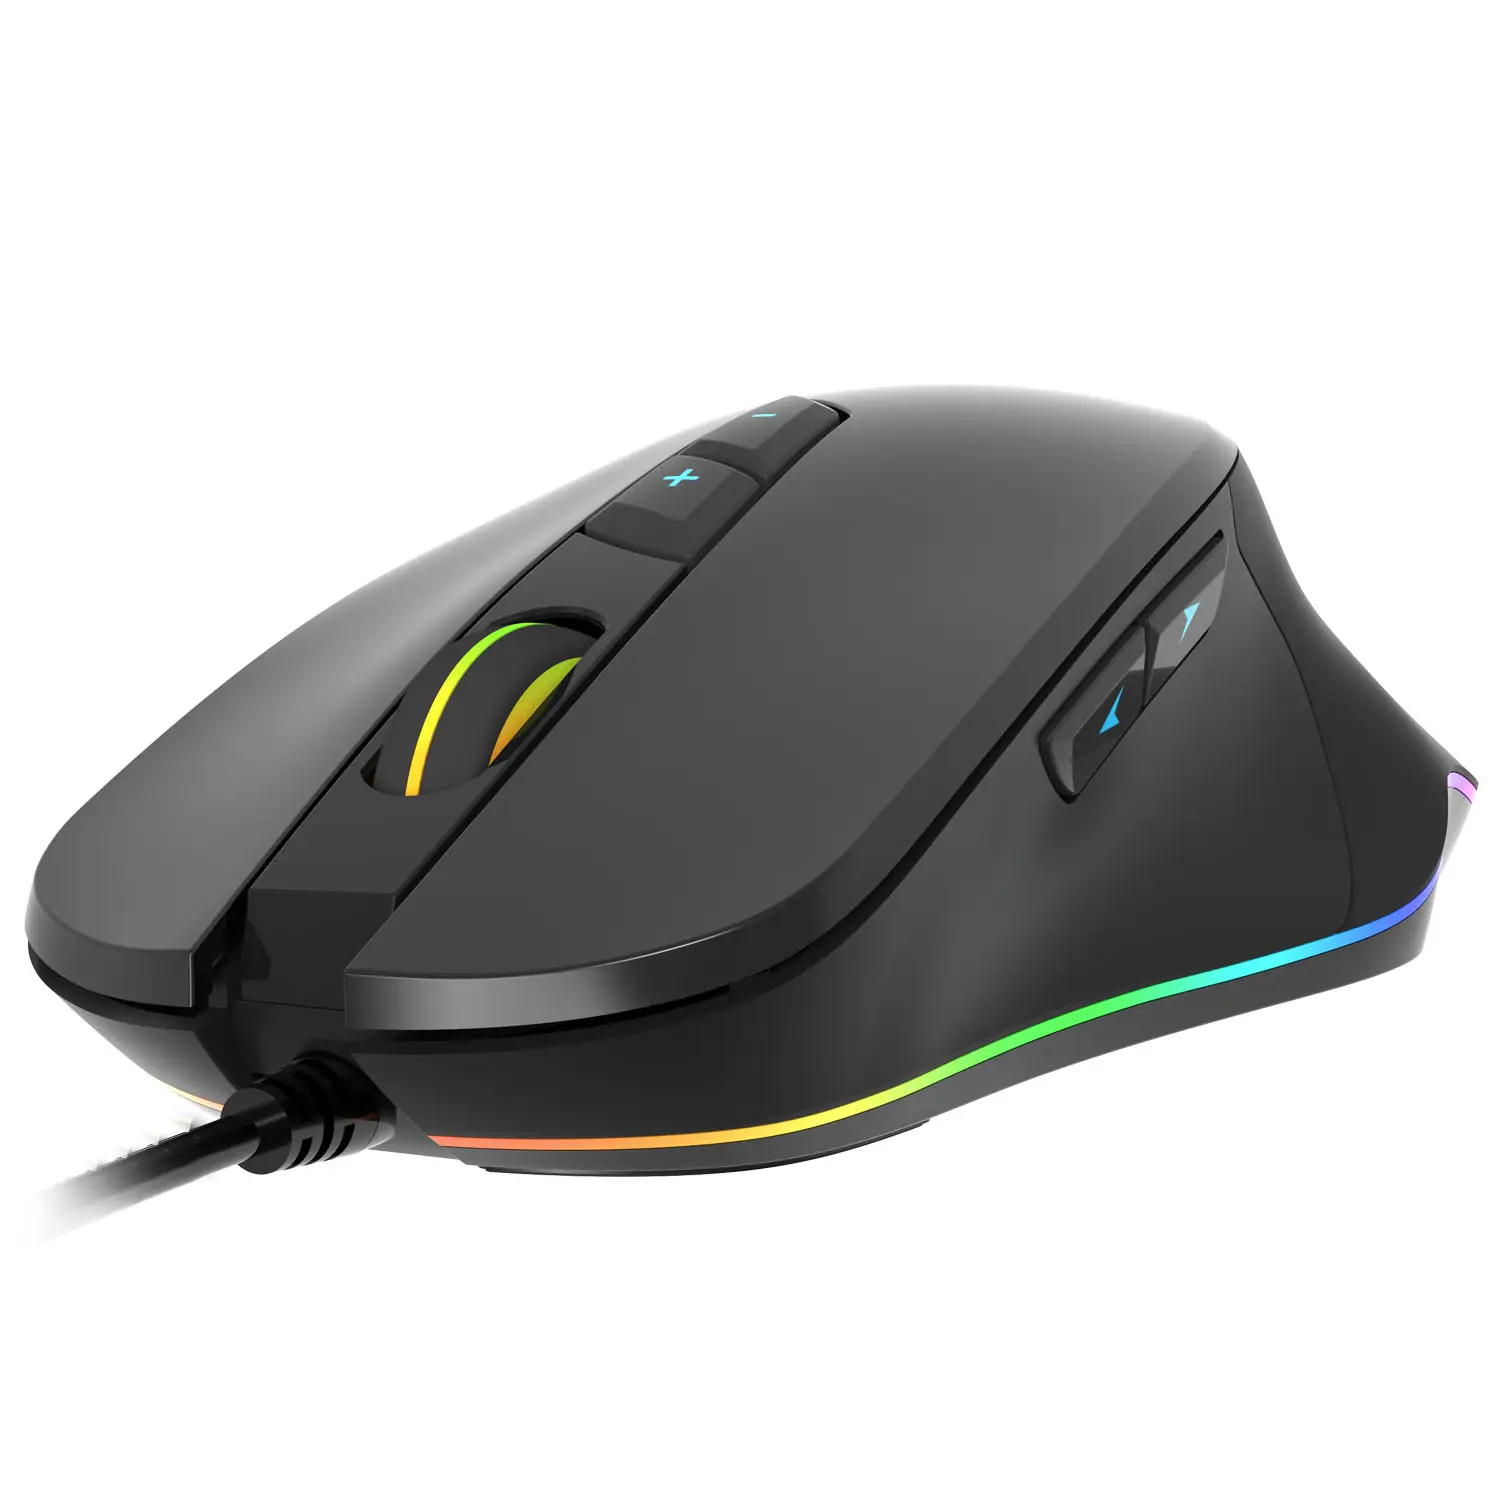 GX40 Programmable Gaming mouse adjustable 16000DPI Wired RGB gaming mouse with software